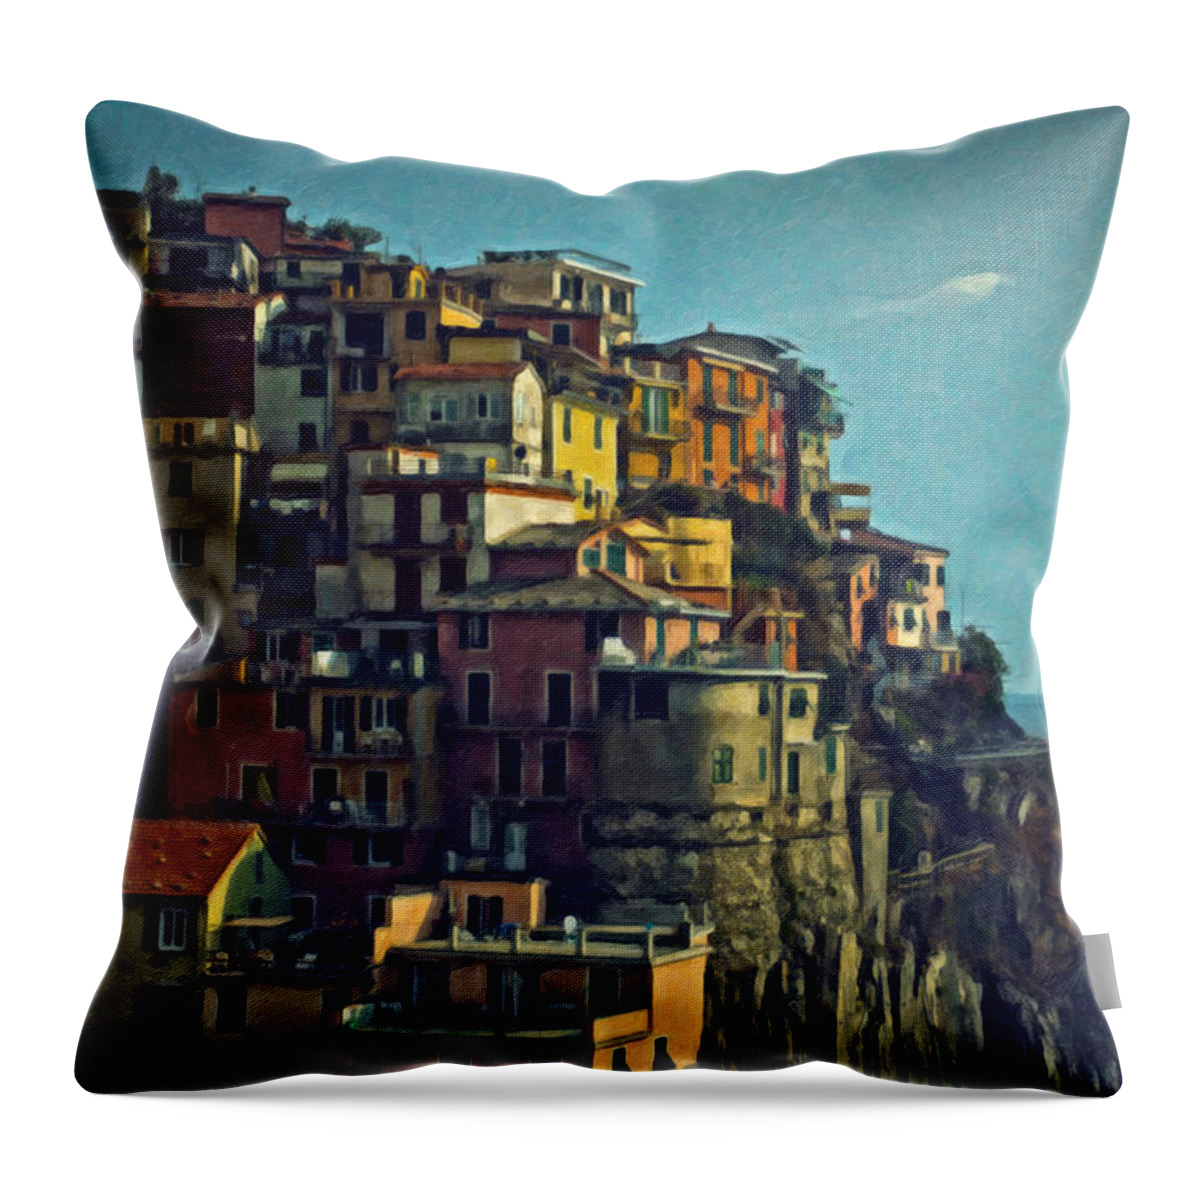 Cinque Terre Throw Pillow featuring the painting Cinque Terre Itl4015 by Dean Wittle